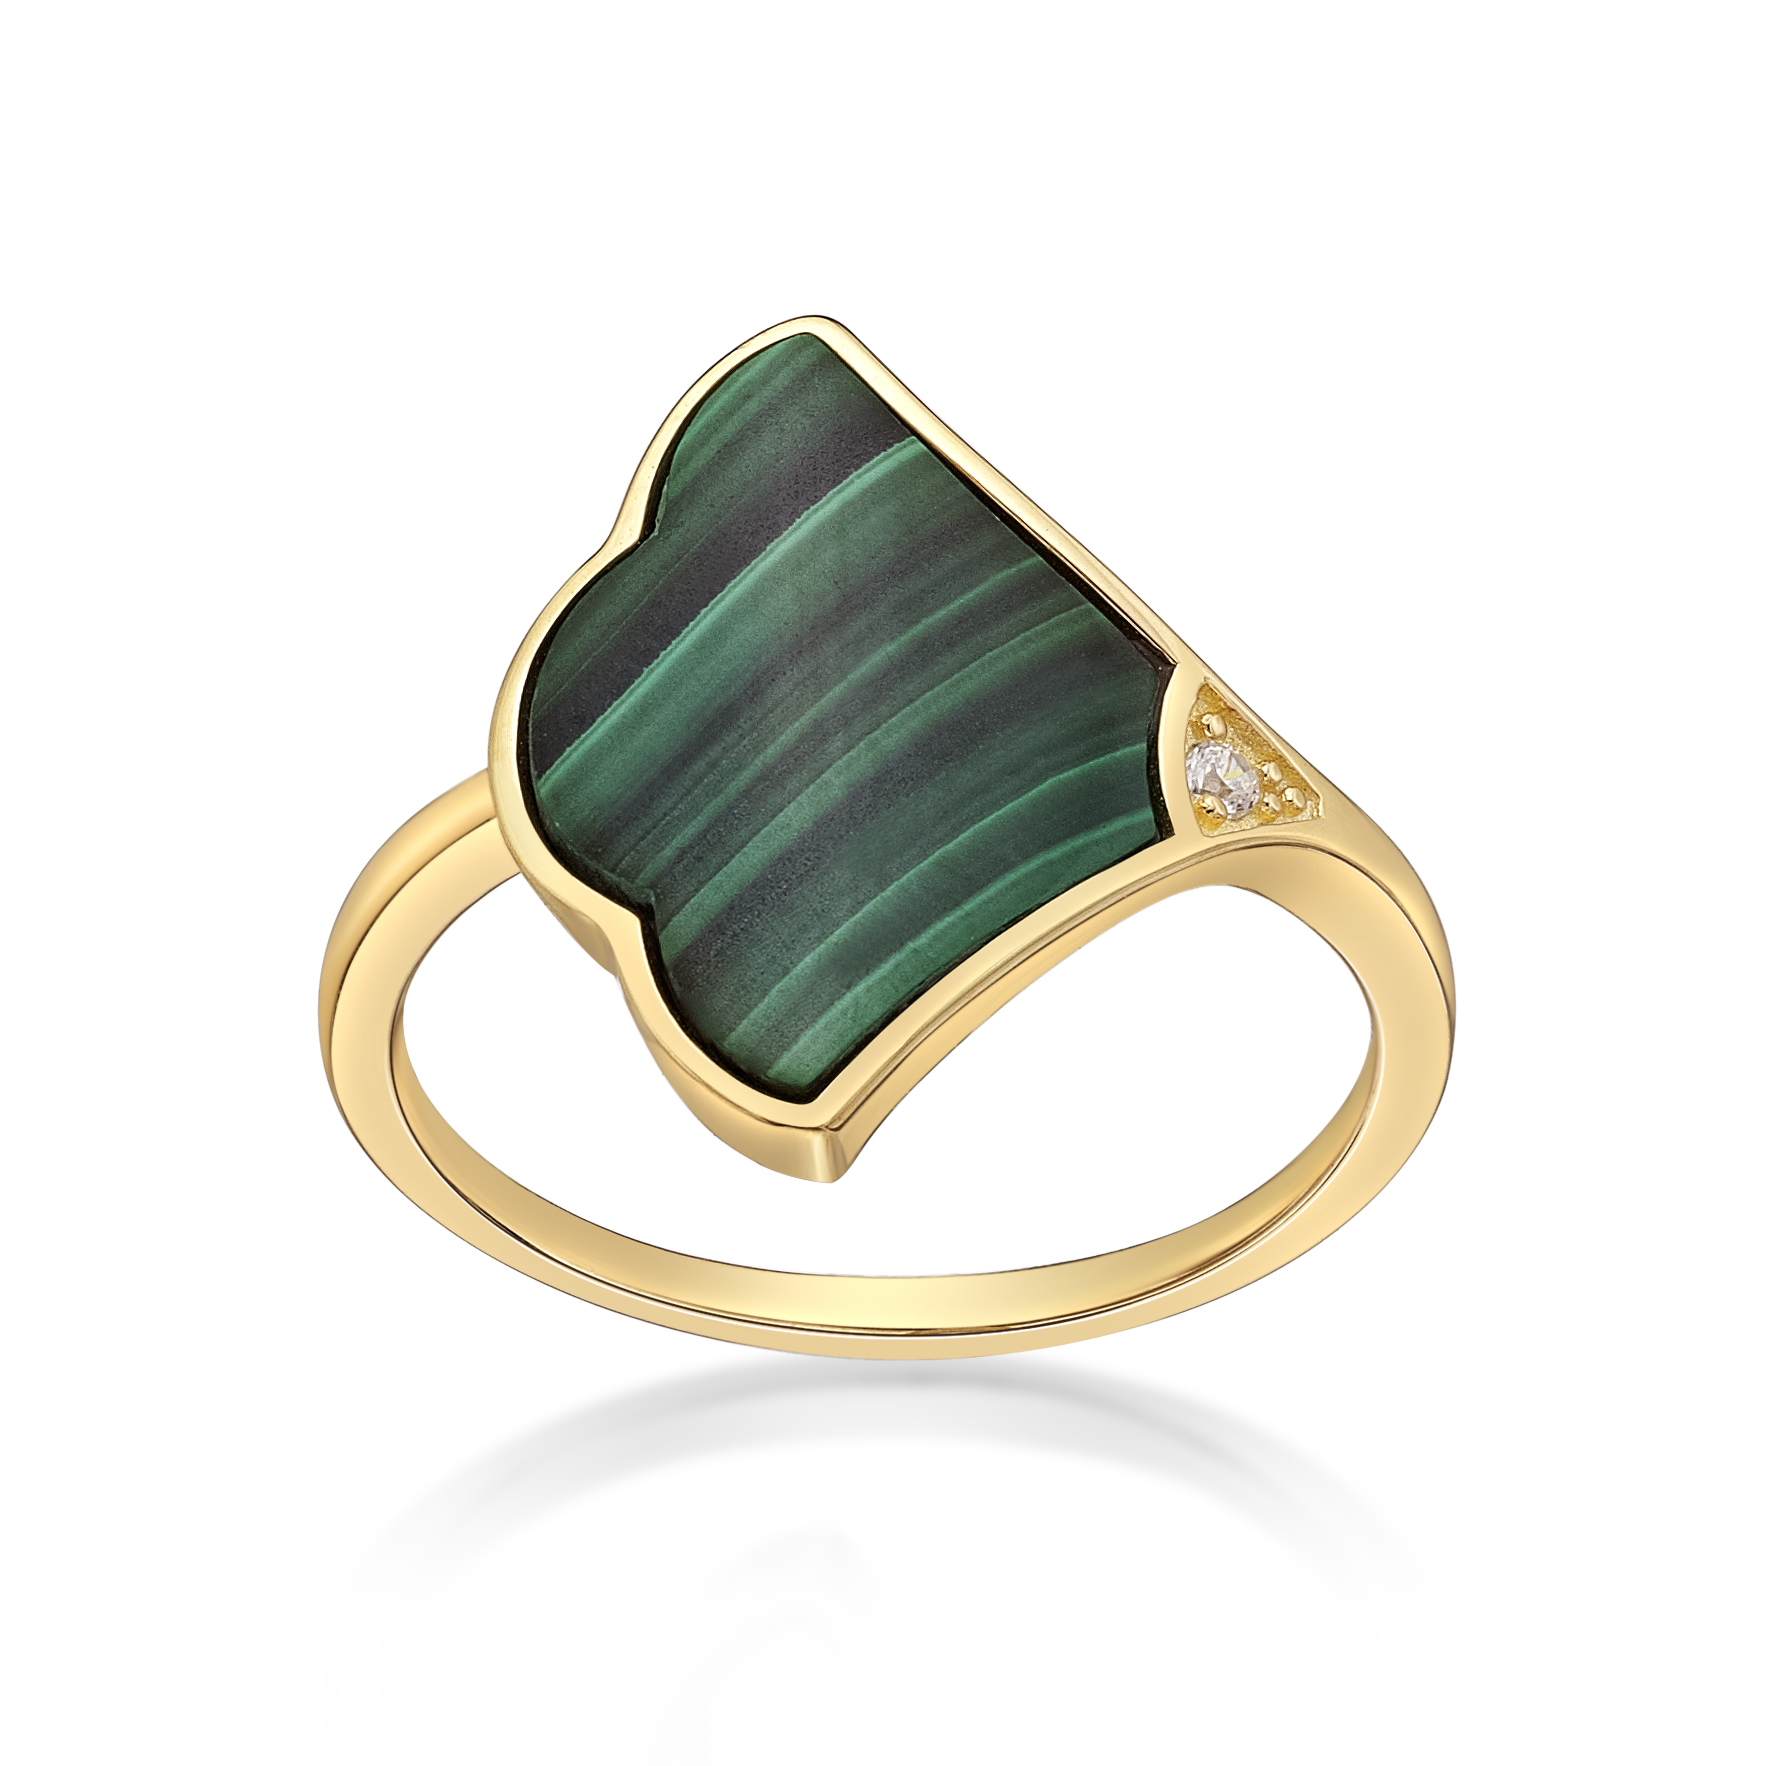 Lavari Jewelers Women's Malachite Fan Ring with Yellow Gold Plating, 925 Sterling Silver